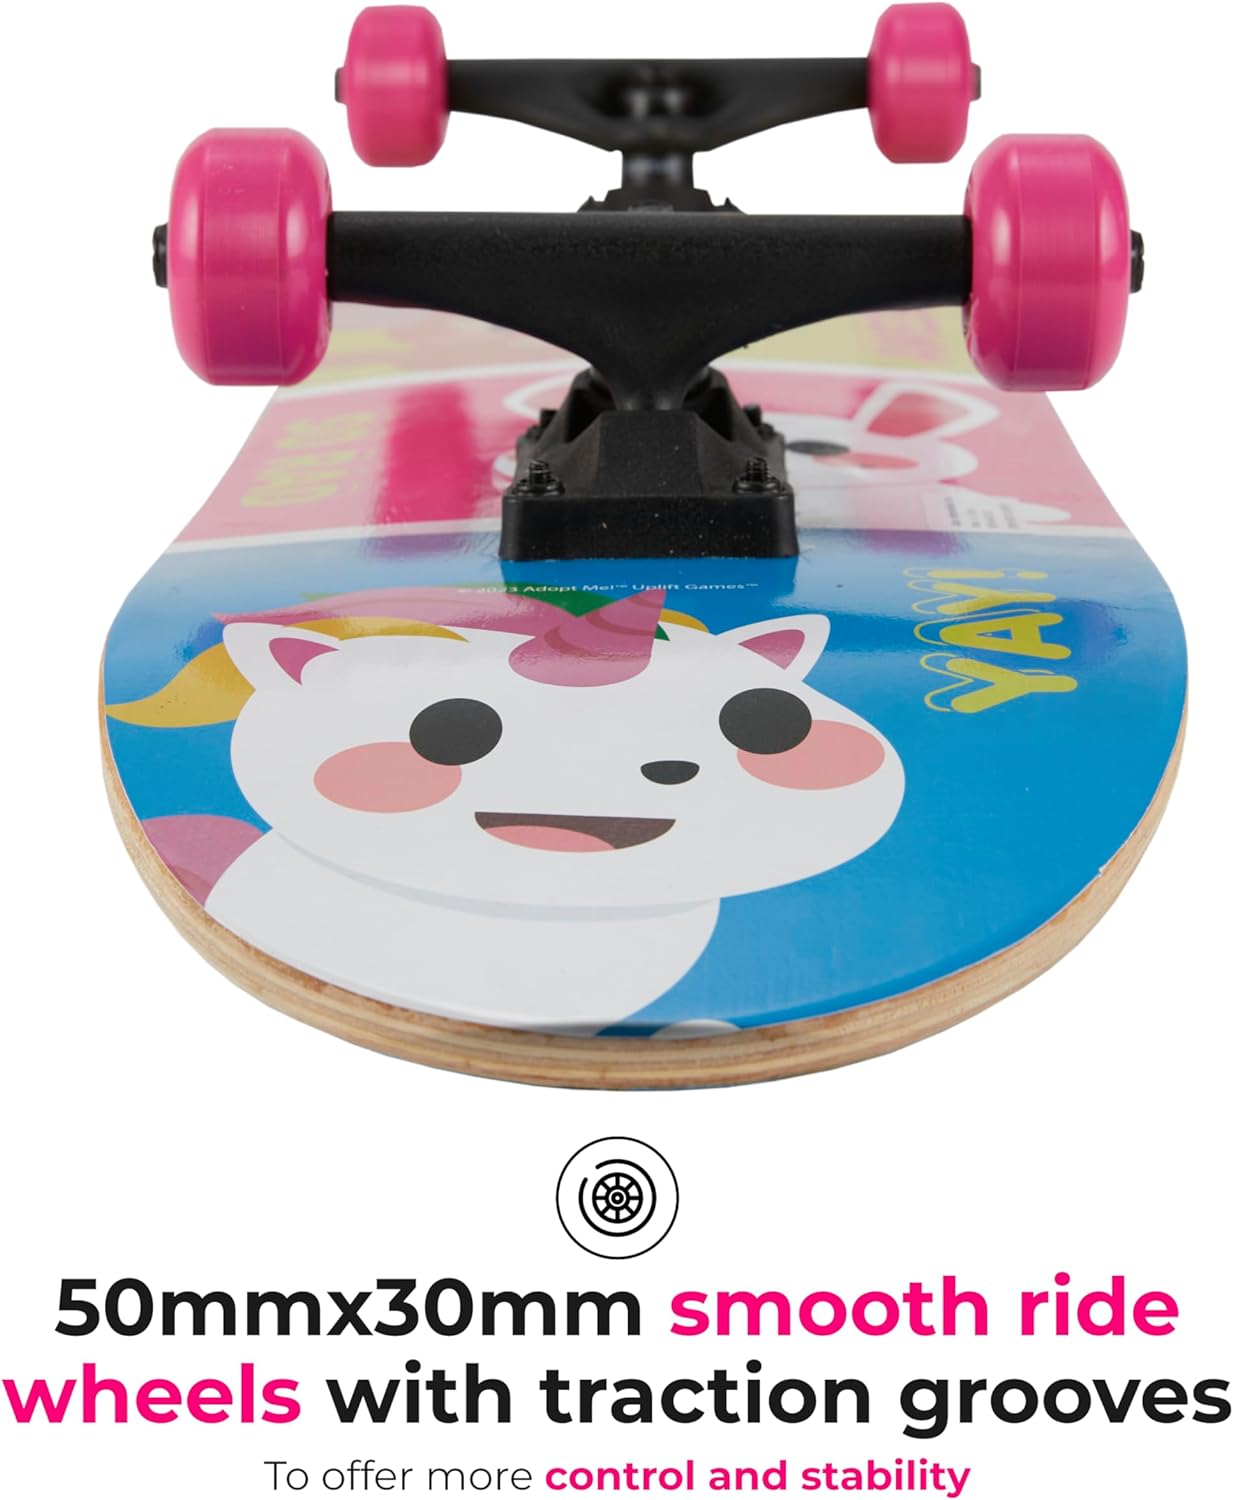 Adopt Me 31 Skateboard Great for Kids and Teens Cruiser Skateboard with ABEC 5 Bearings, Durable Deck, Smooth Wheels